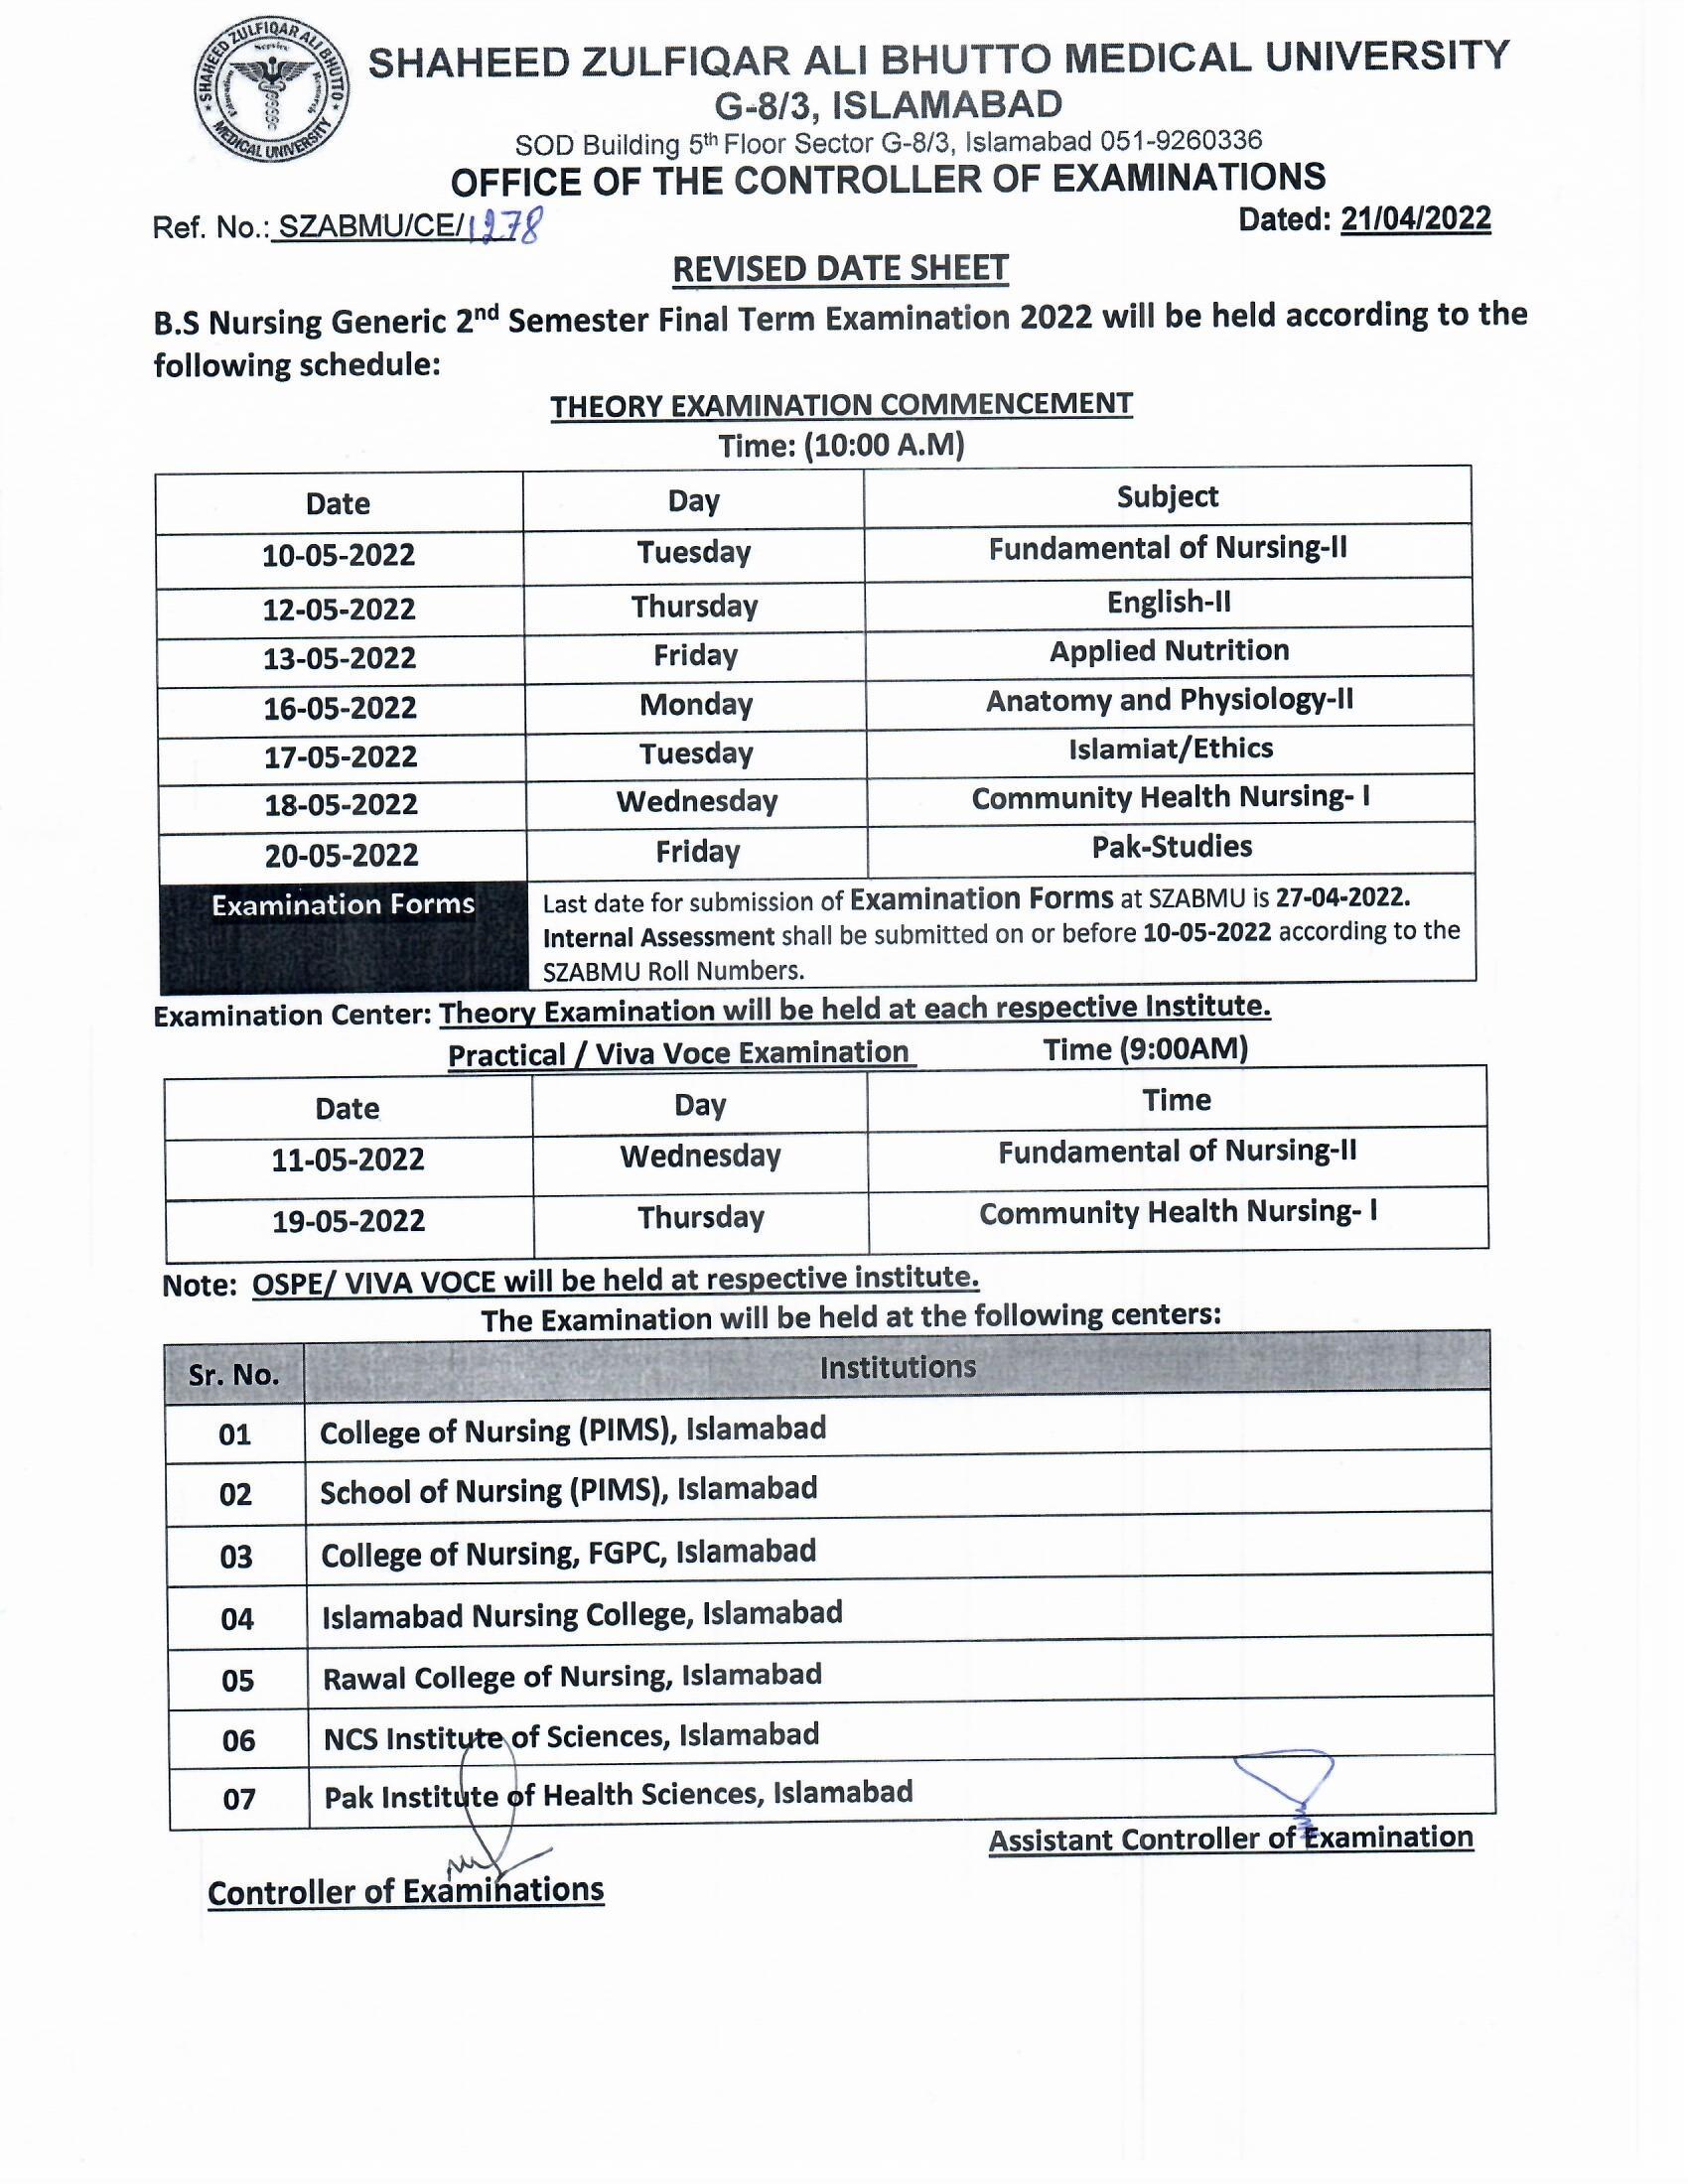 Revised Date Sheets - BS Nursing Generic 2nd Semester Final Term Examination 2022